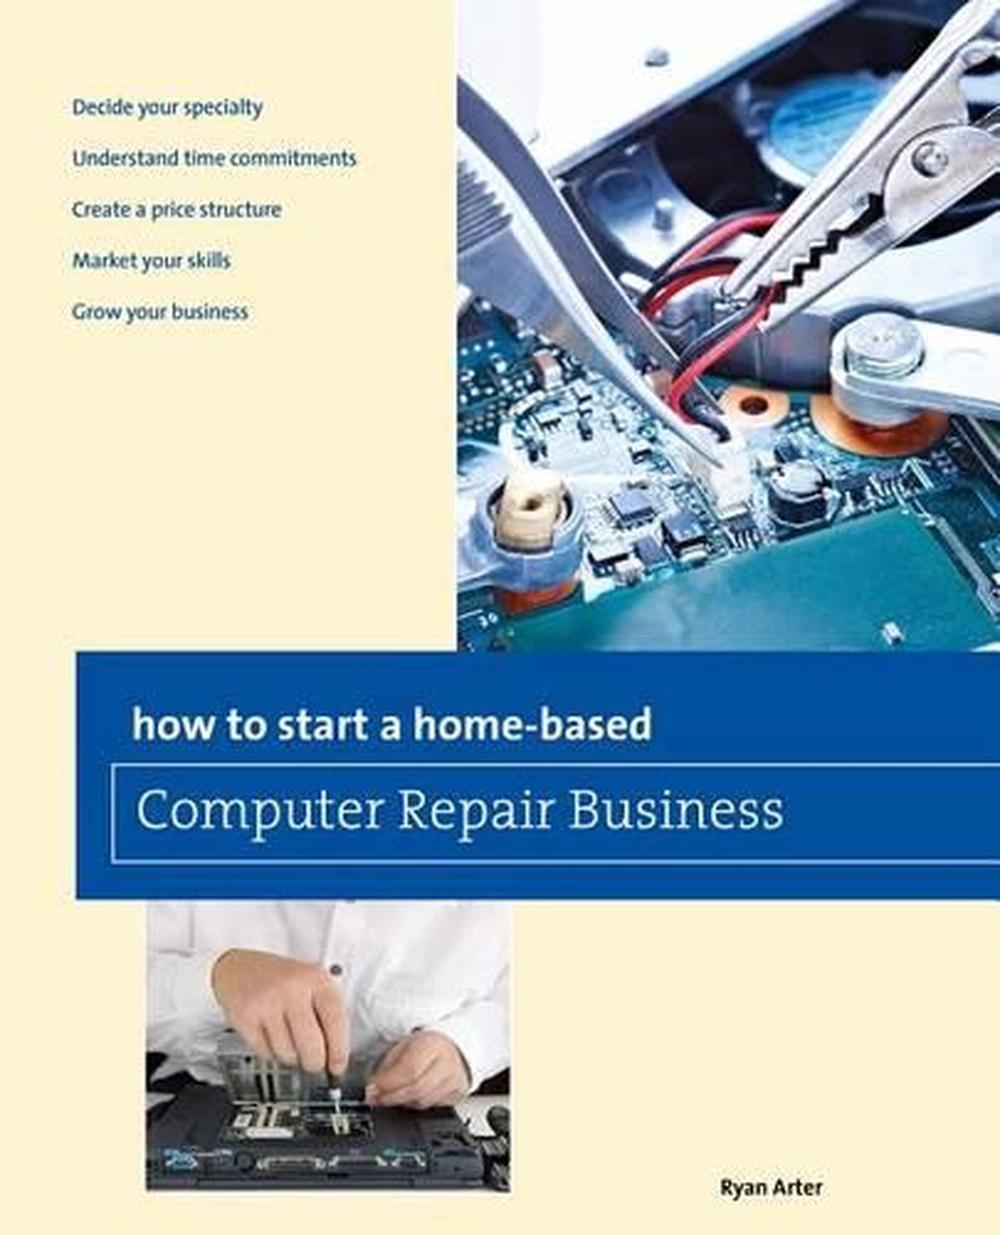 How to Start a Home-Based Computer Repair Business by Ryan Arter